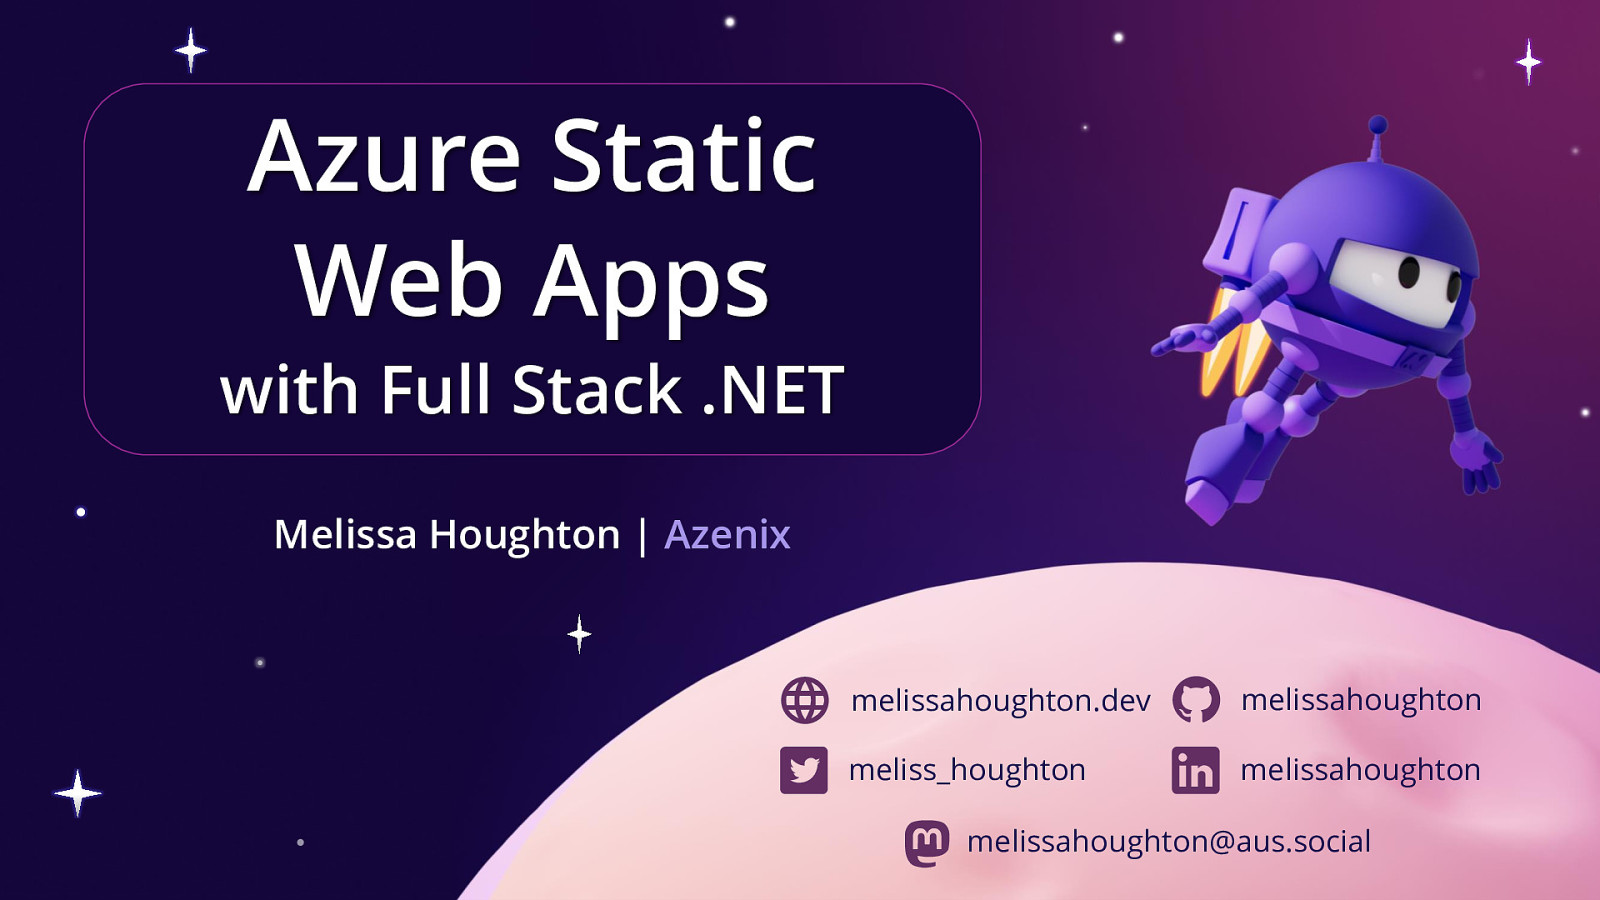 Azure Static Web Apps with Full Stack .NET